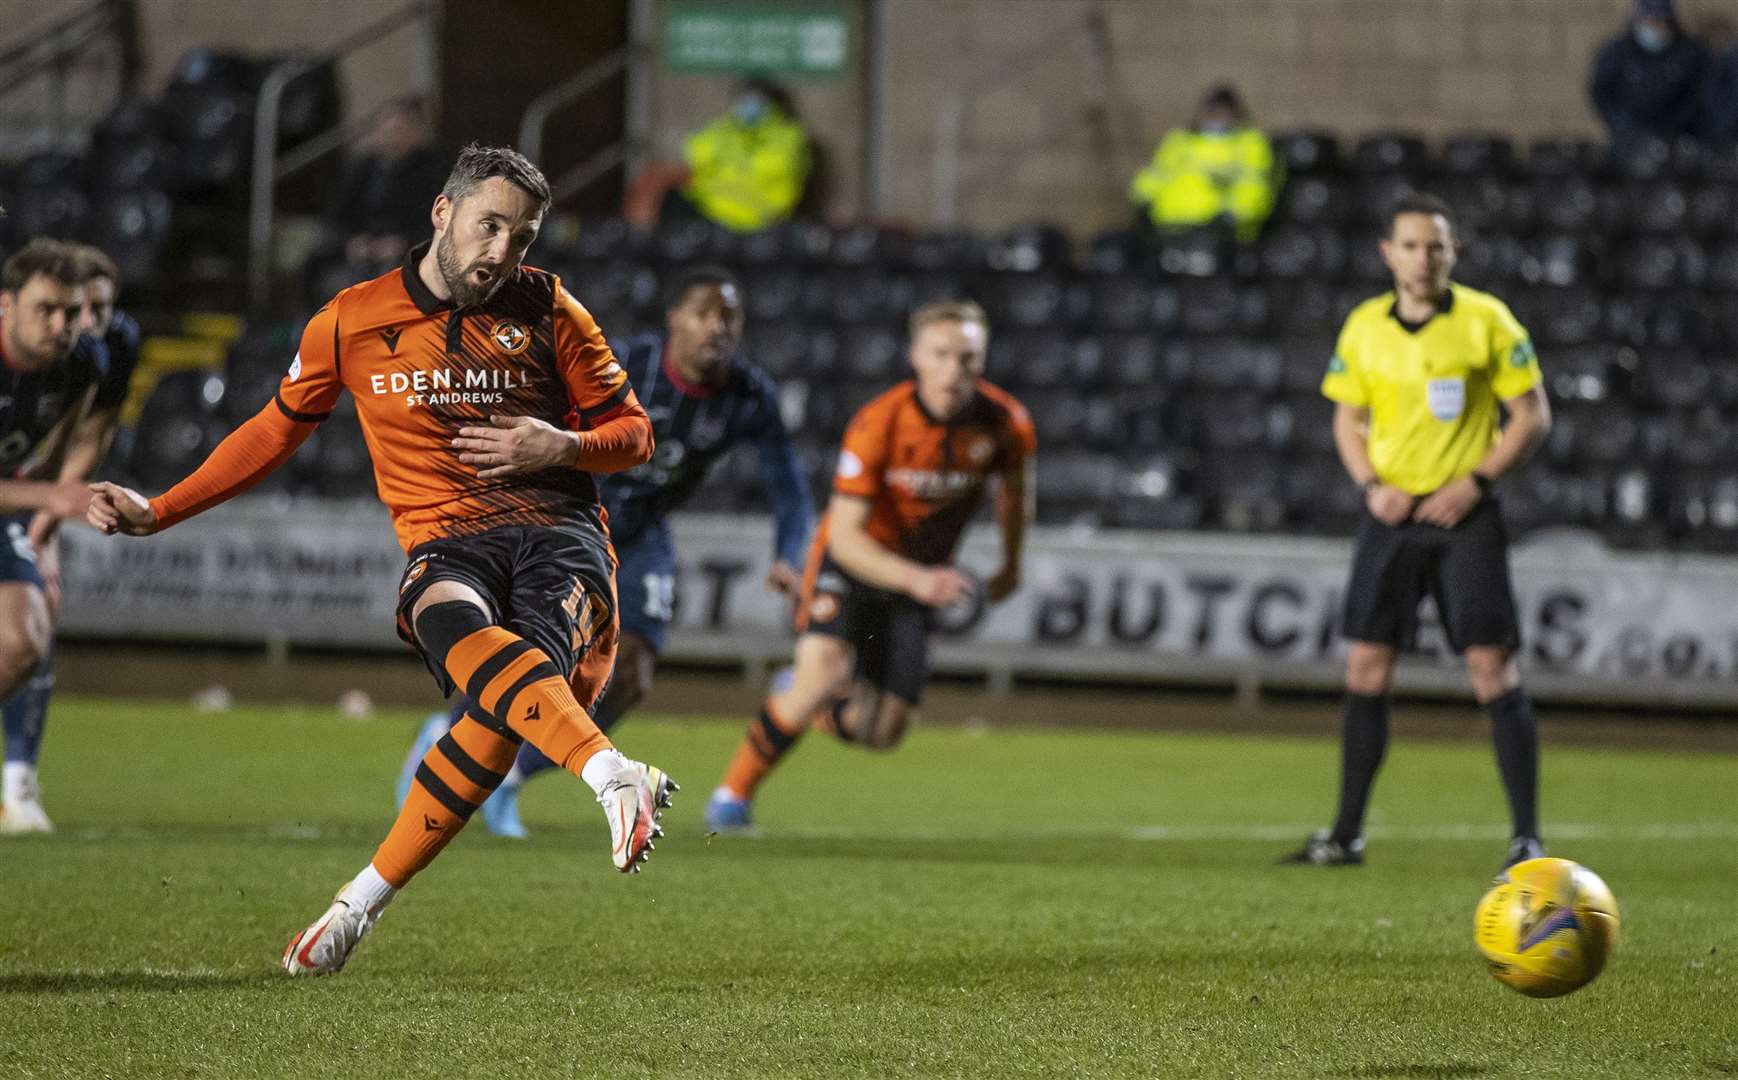 Nicky Clark's double won the match for Dundee United. Picture: Andy Barr